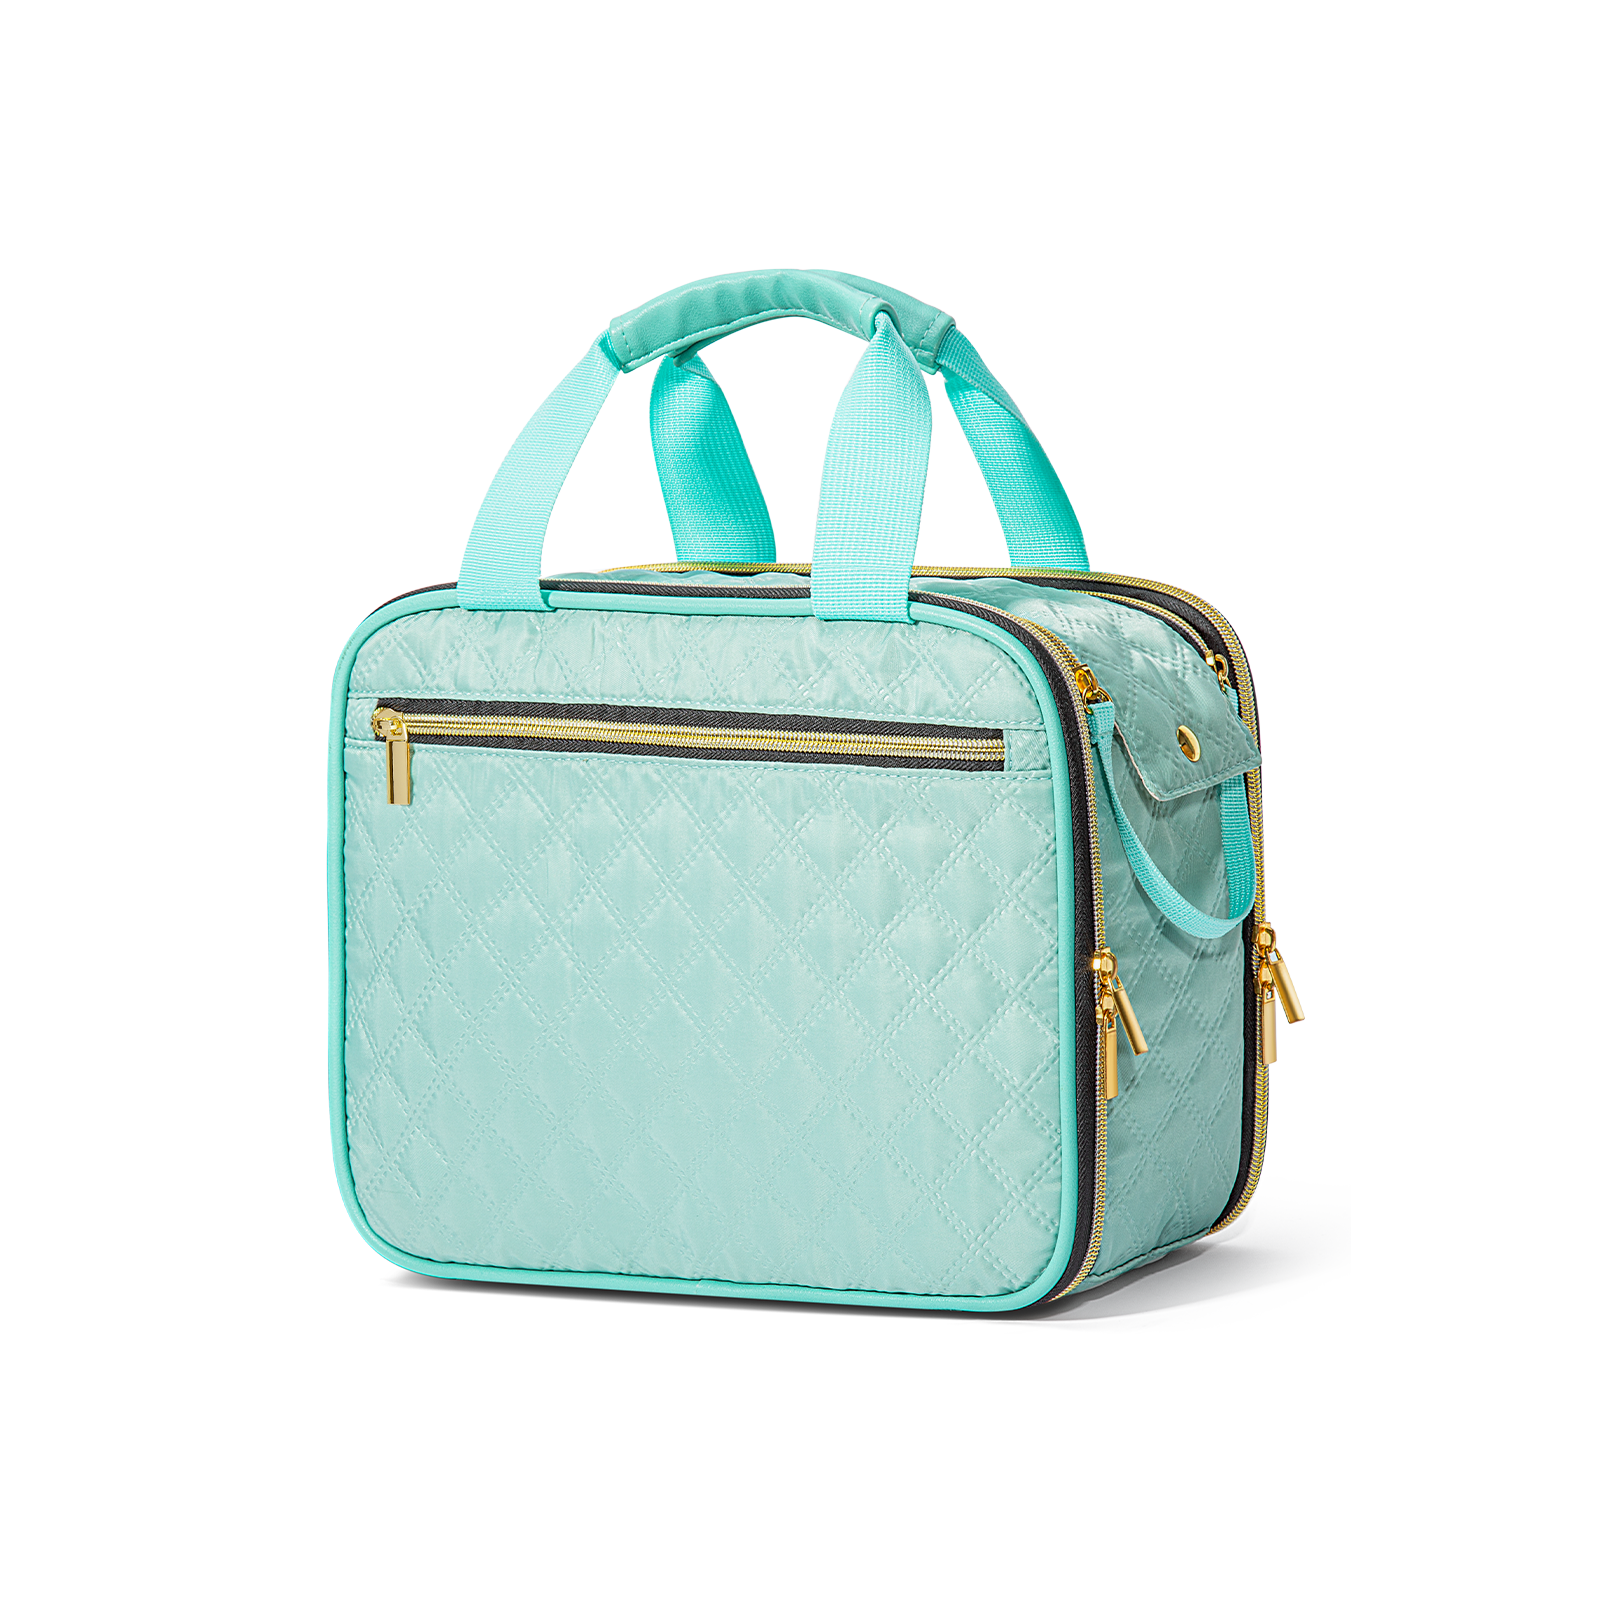 Large Capacity Travel Toiletry Hanging Bag (Turquoise)